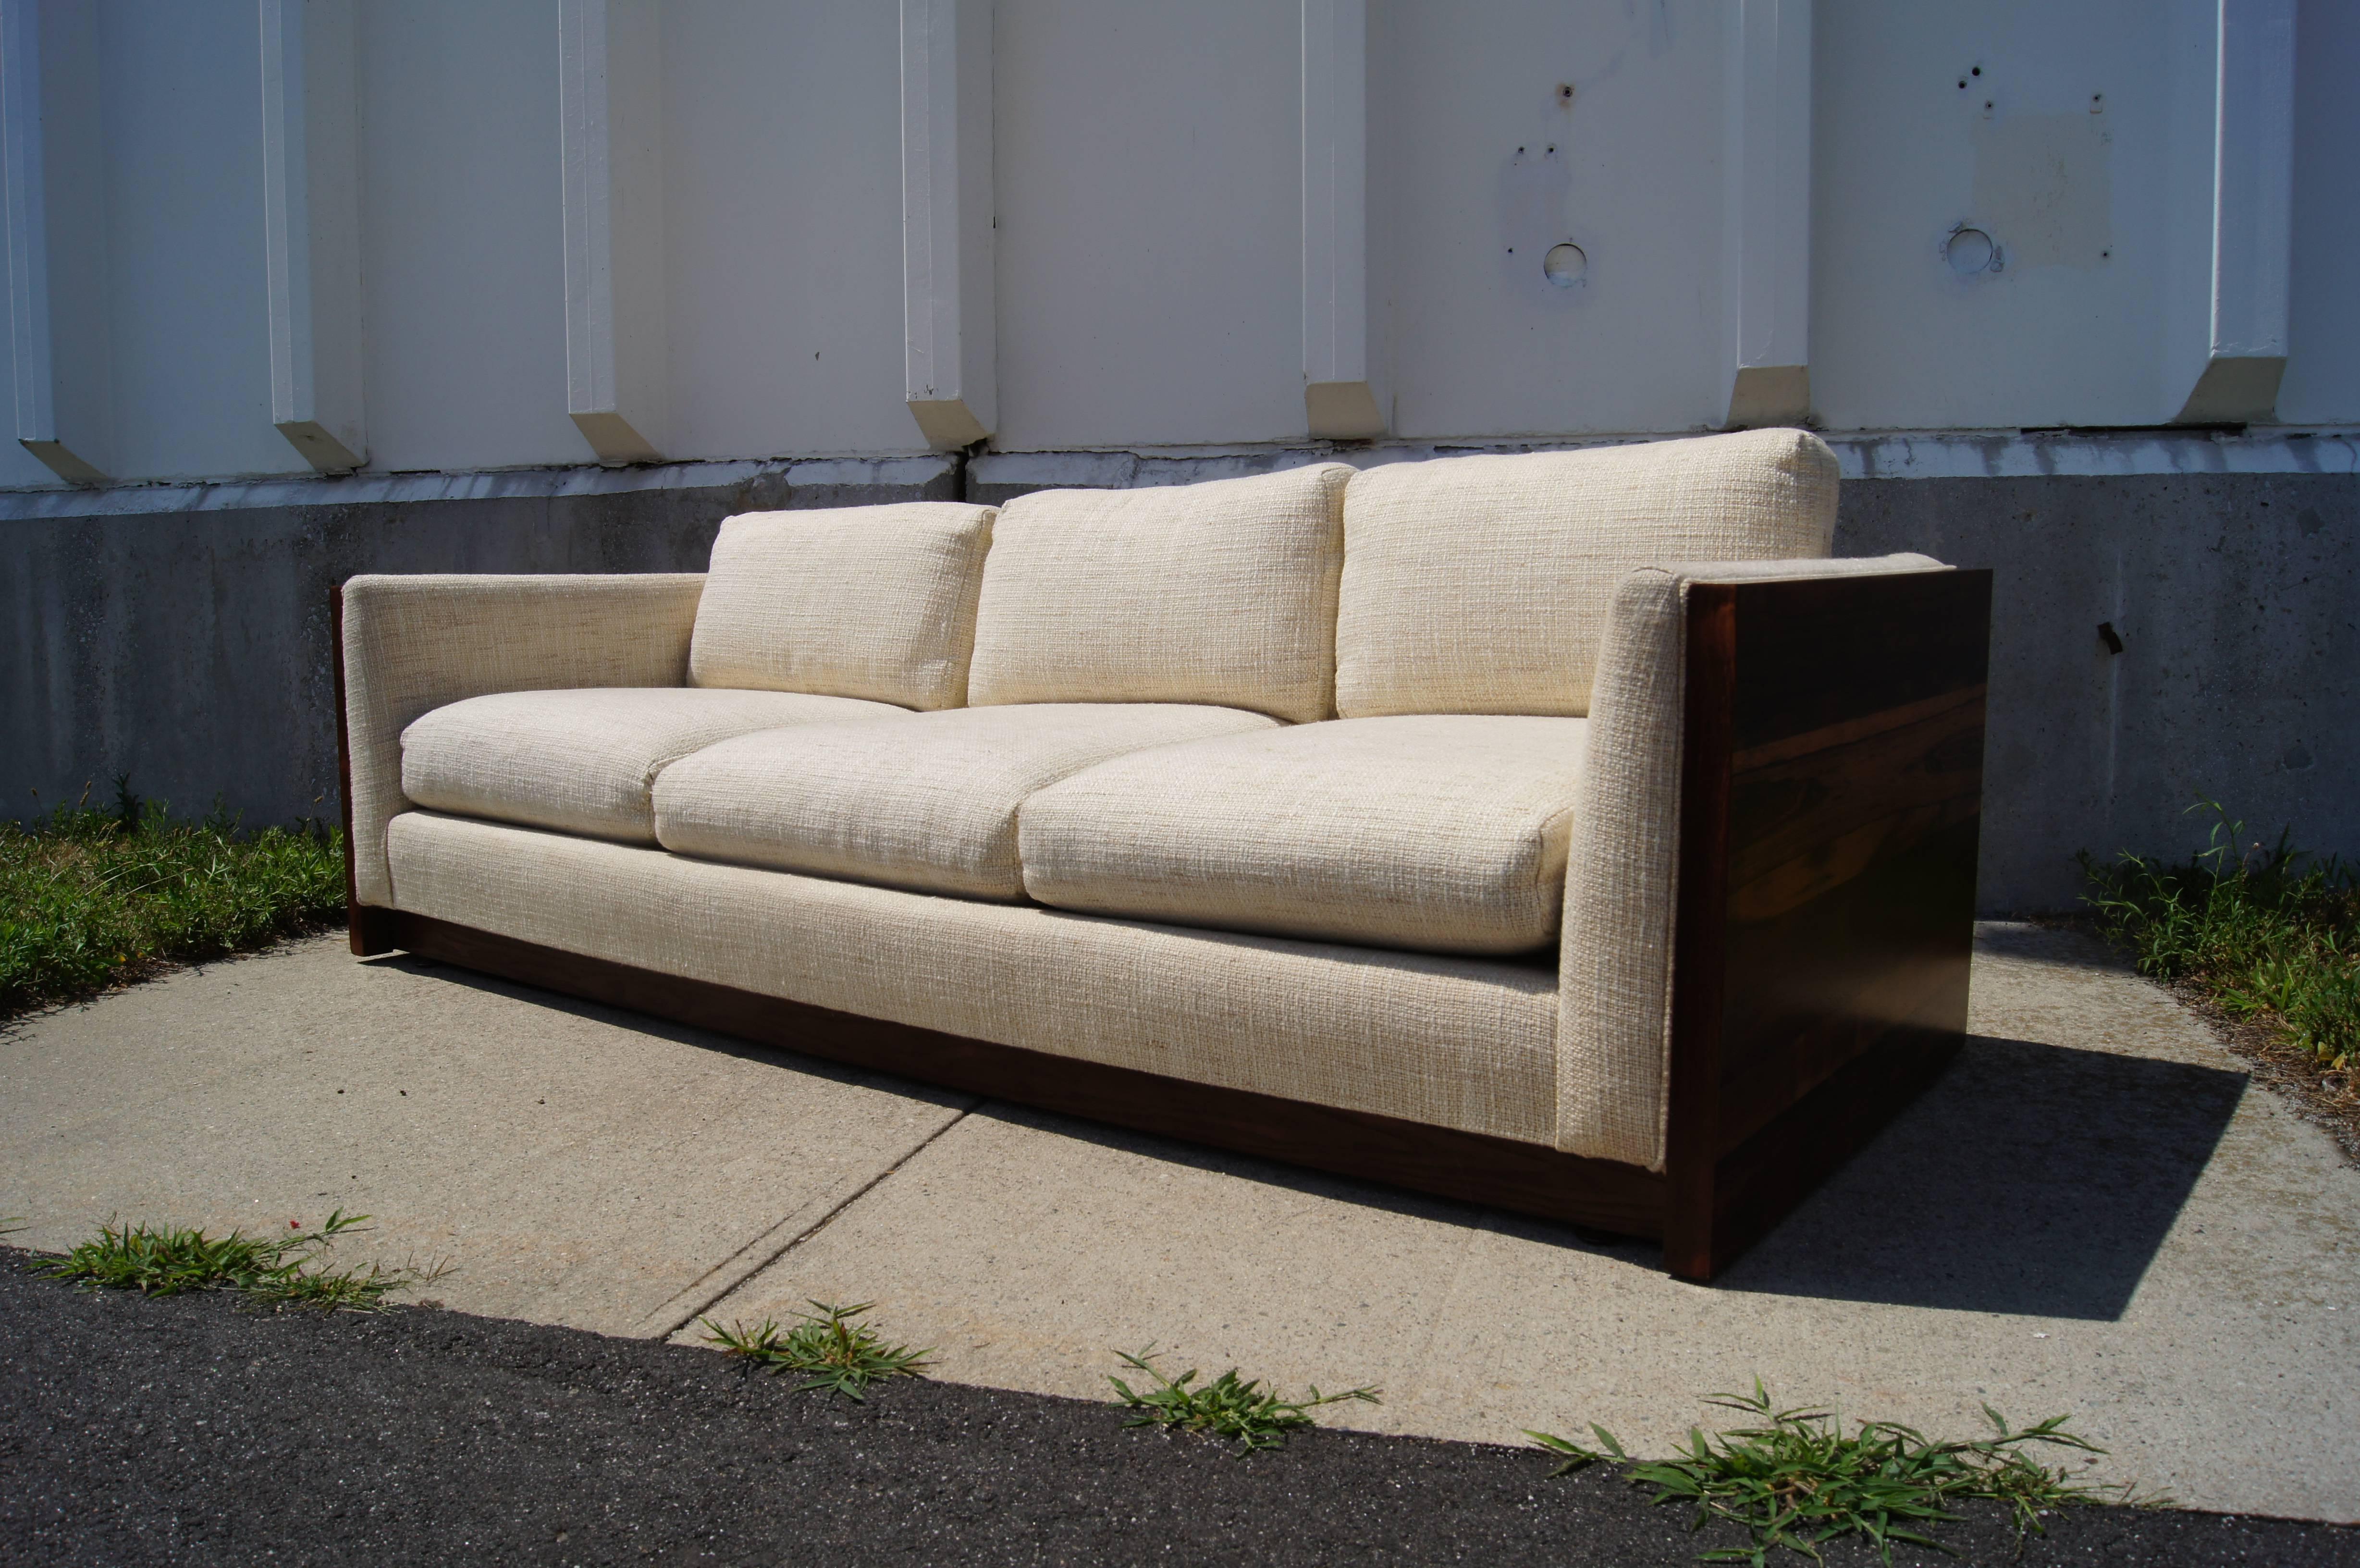 Milo Baughman created this 1960s case sofa for Forecast Furniture. Two gorgeous panels of Brazilian rosewood frame the upholstered seat and give the piece the clean lines typical of the designer's work.